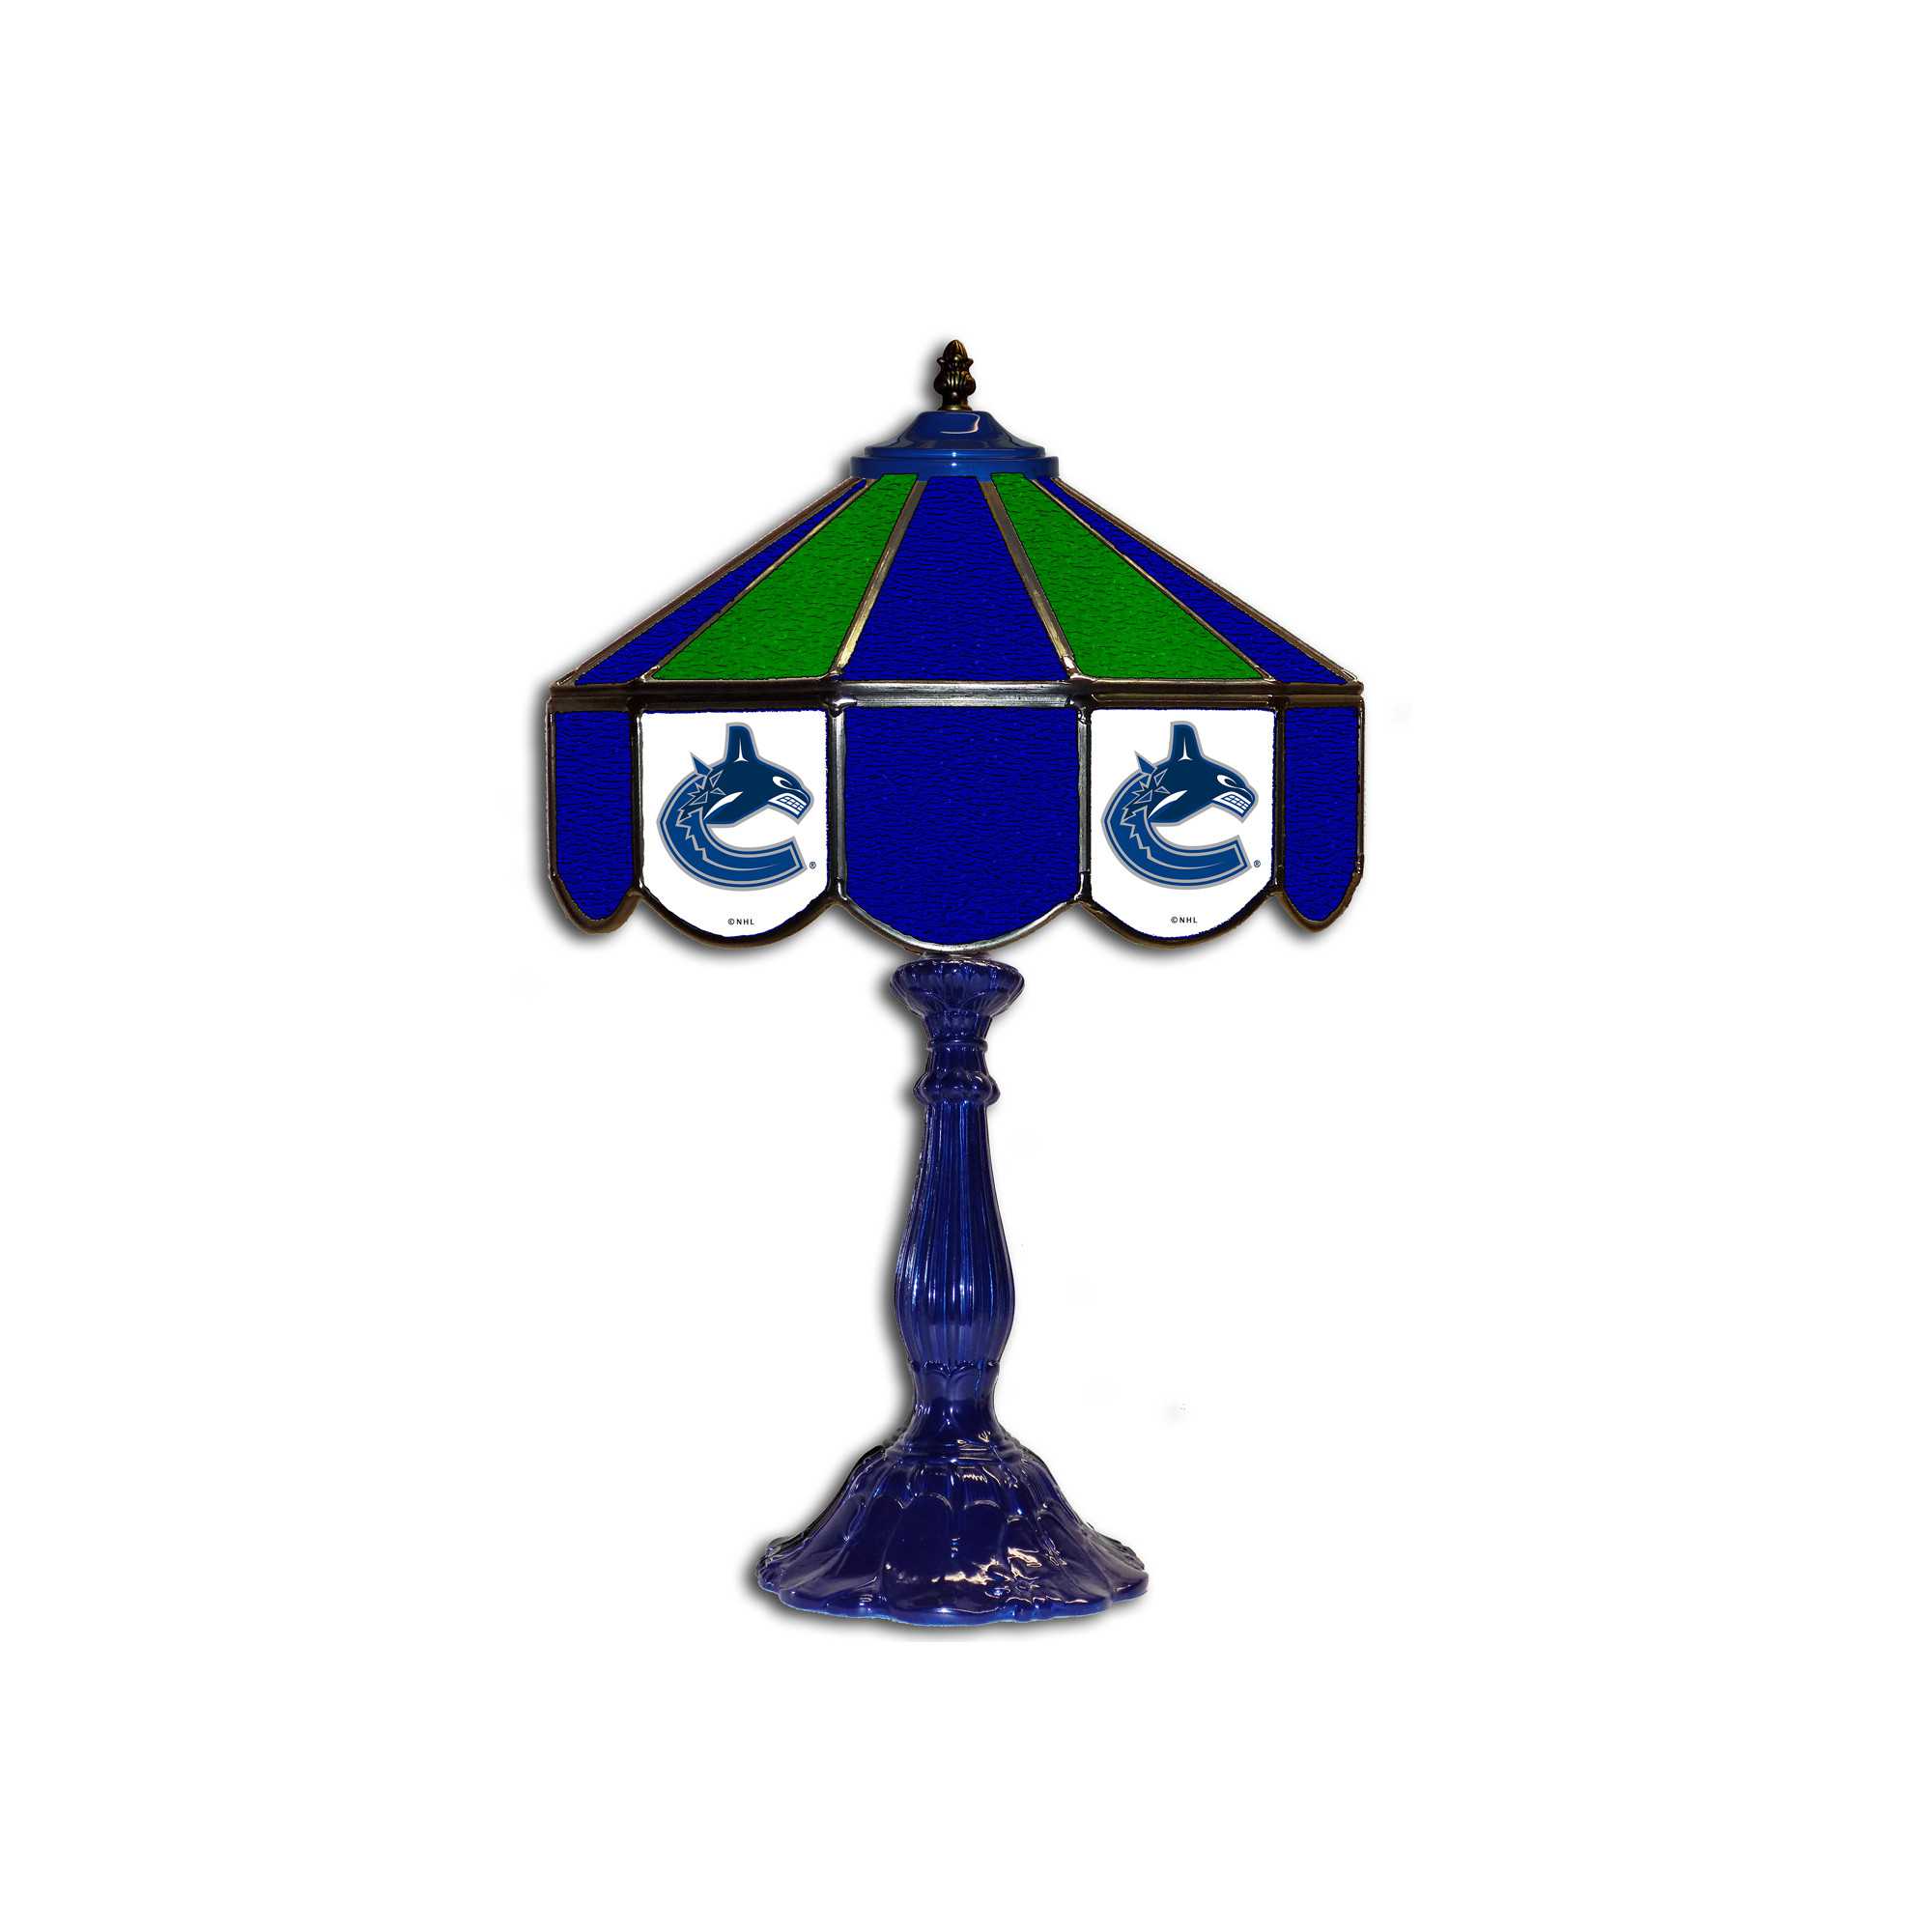 VANCOUVER CANUCKS 21" GLASS TABLE LAMP